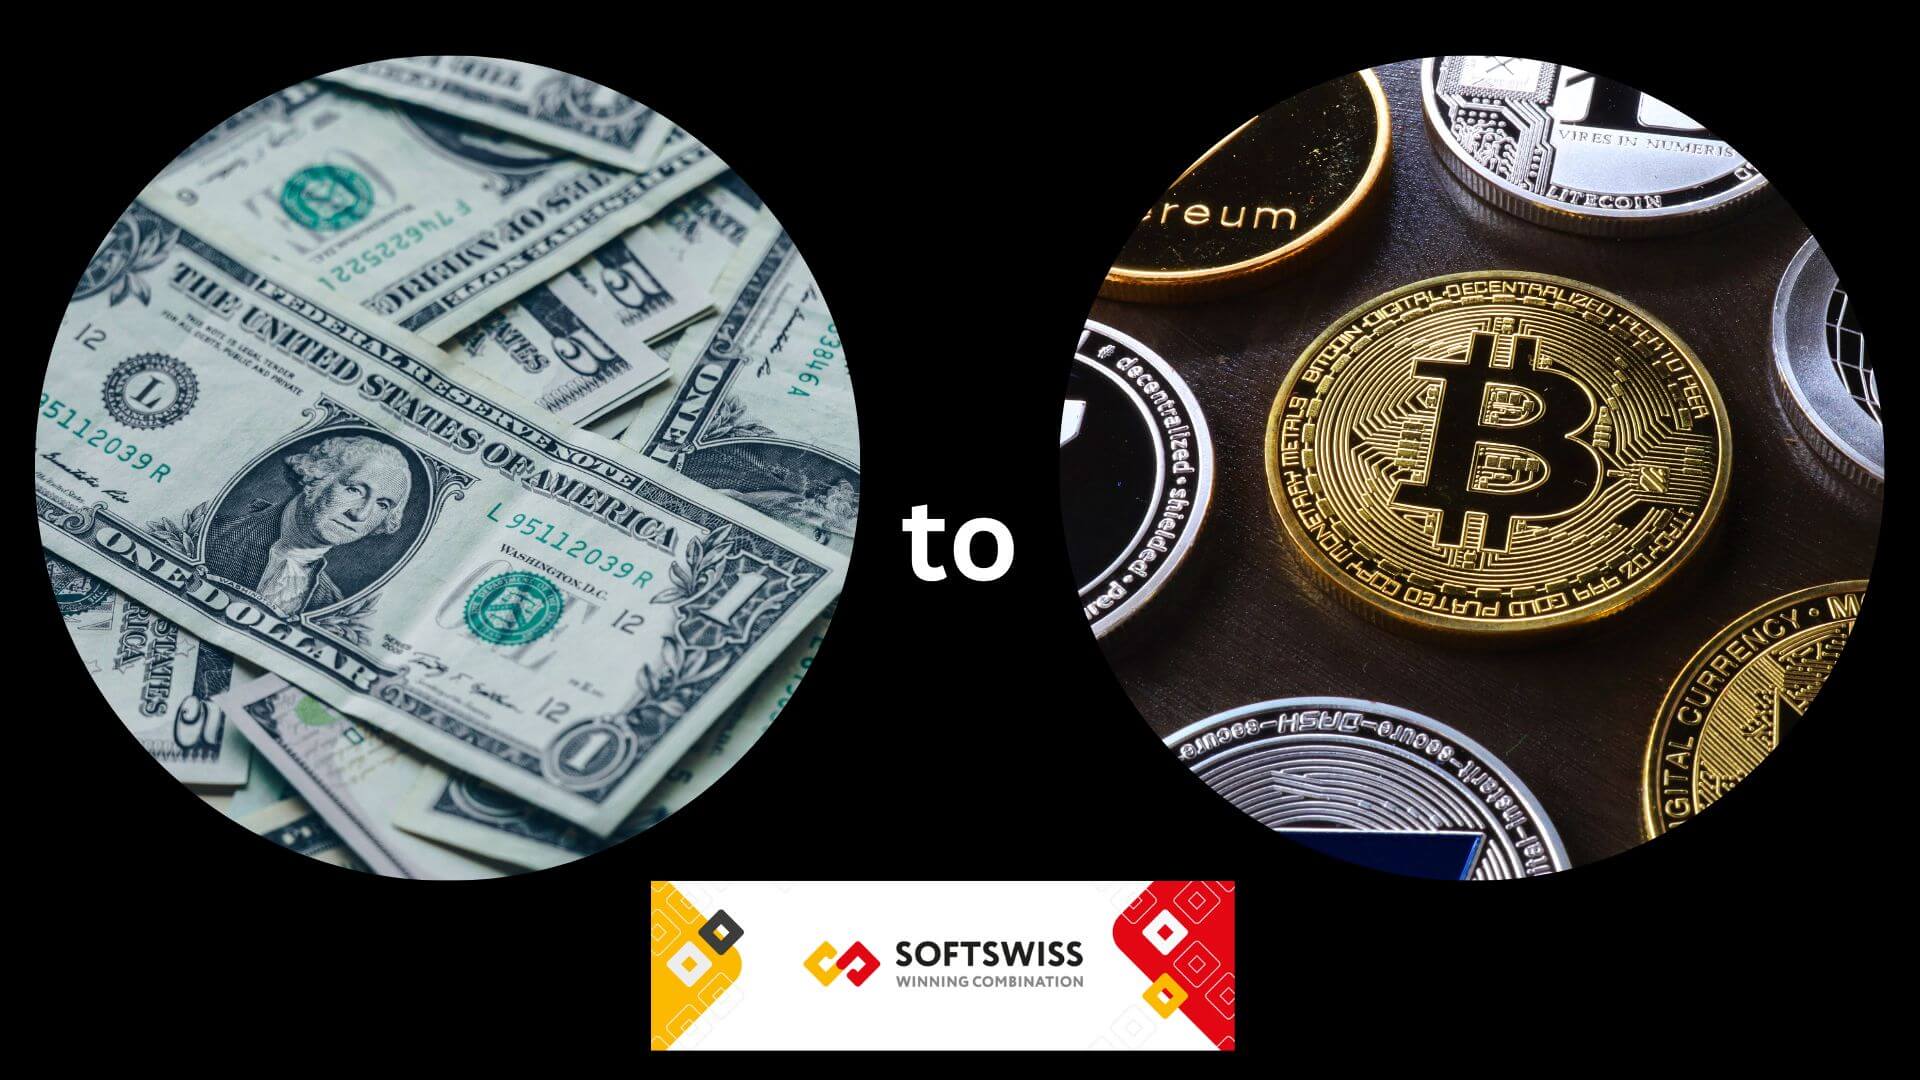 SOFTSWISS Enables Crypto Conversion for 9 Fiat Currencies